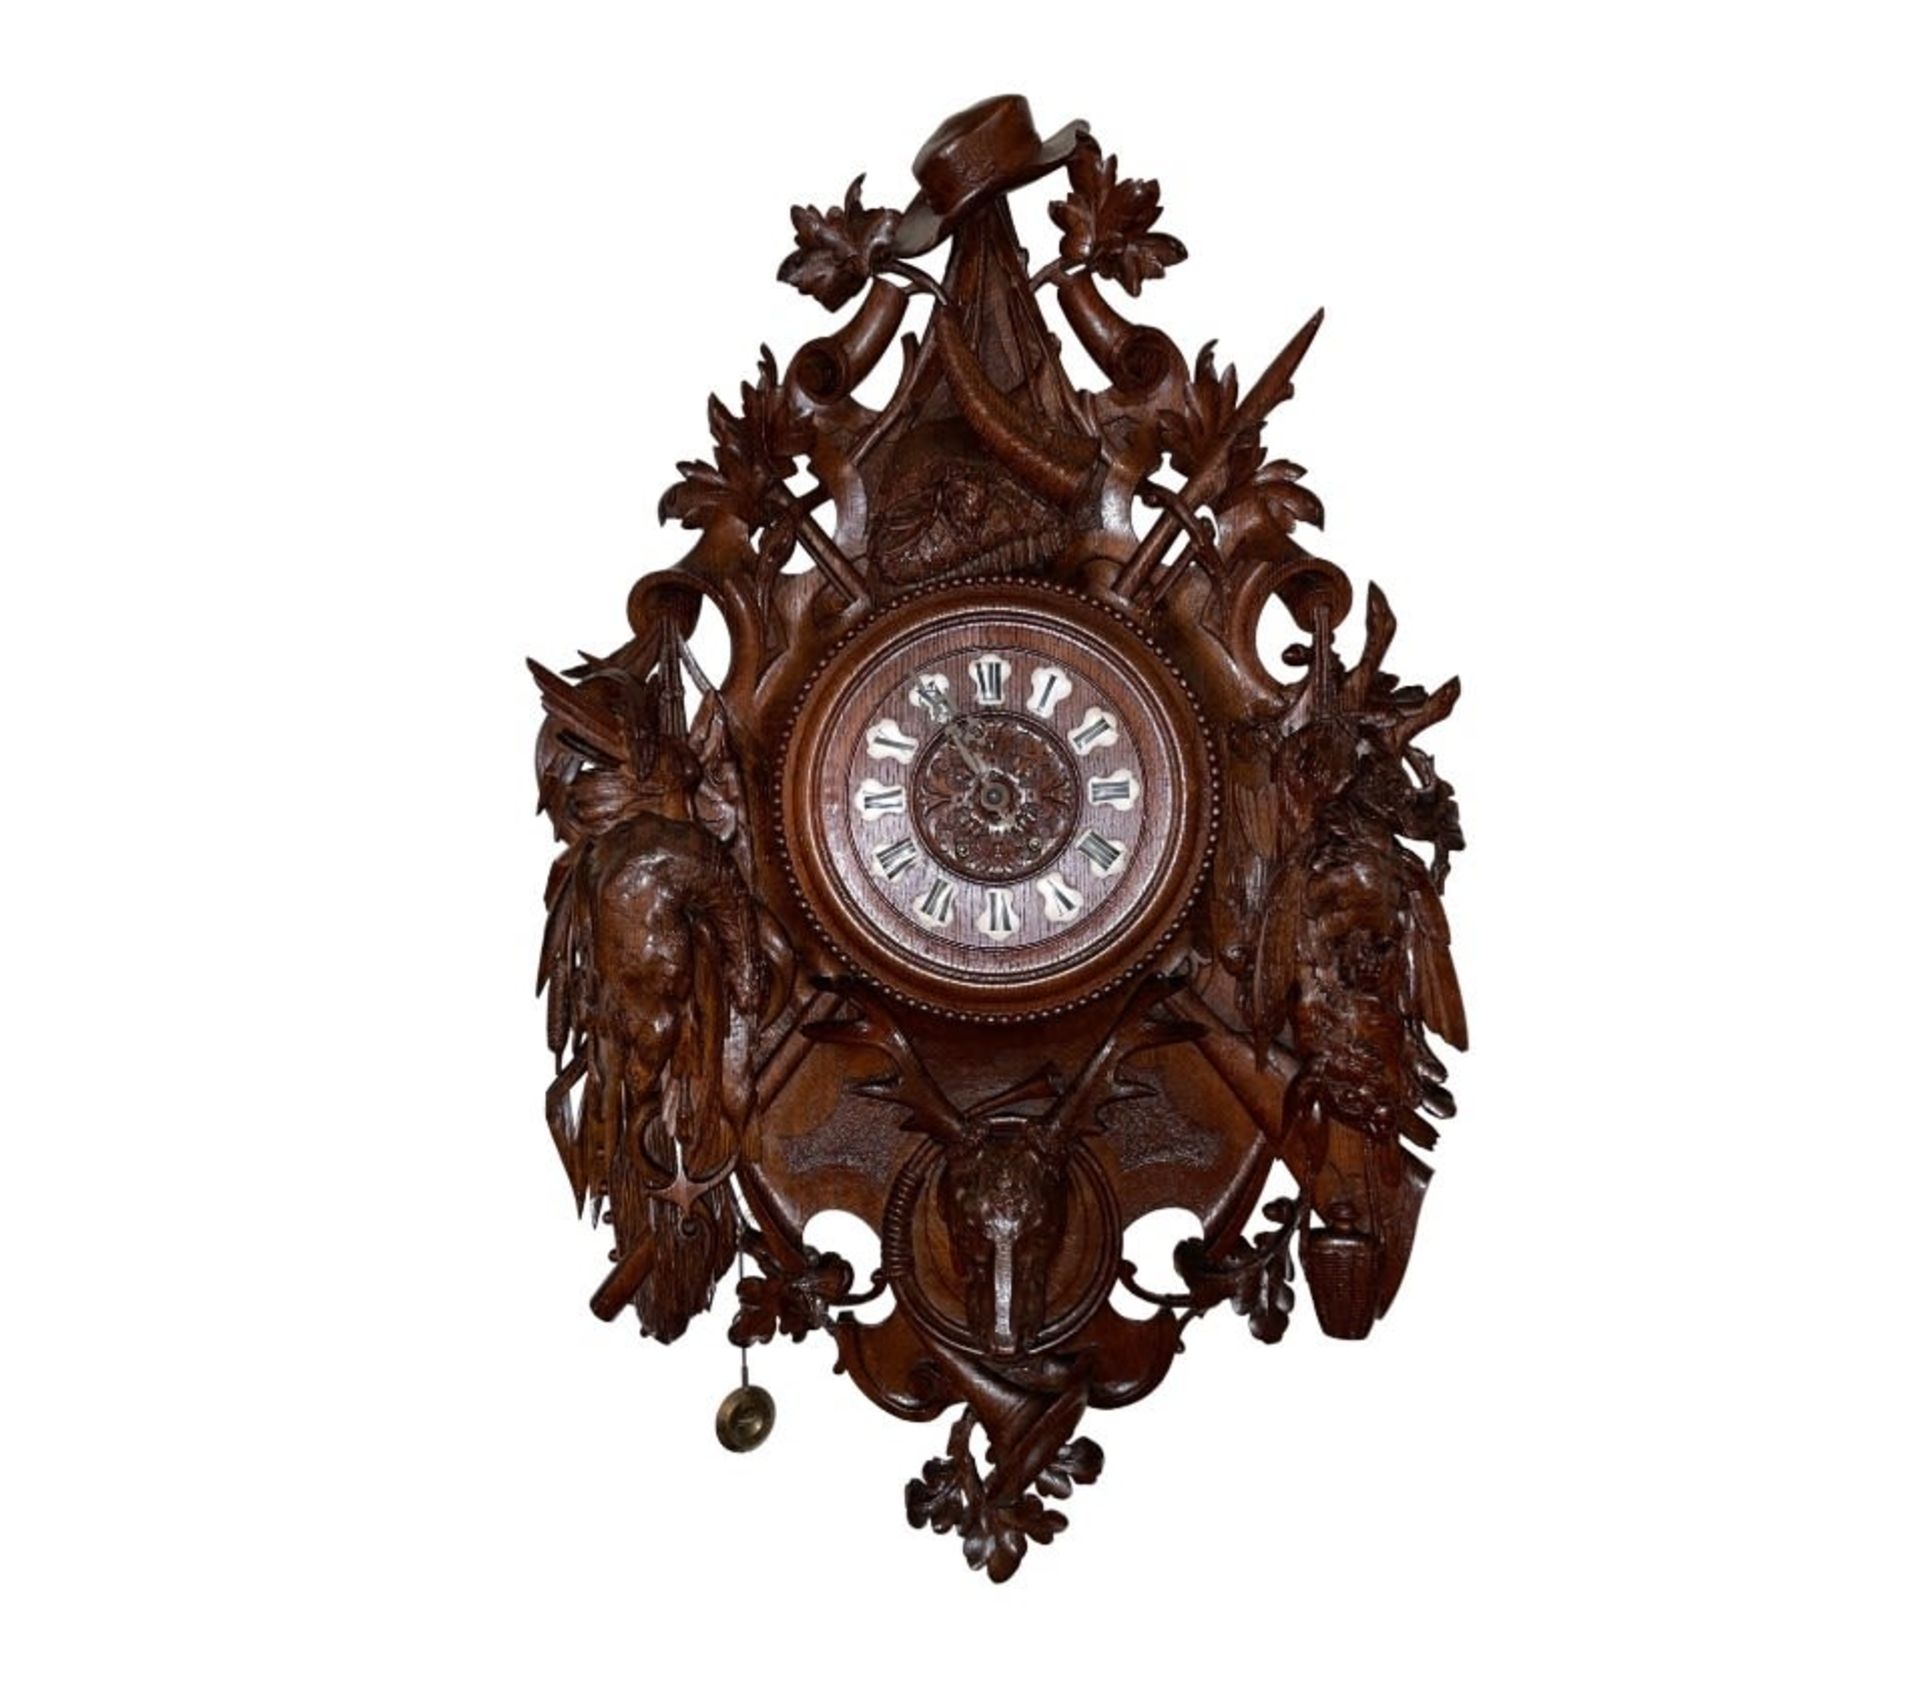 Wall clock in the style of the 'Black Forest', made of pewter and a number plate made of enamel, - Image 13 of 13